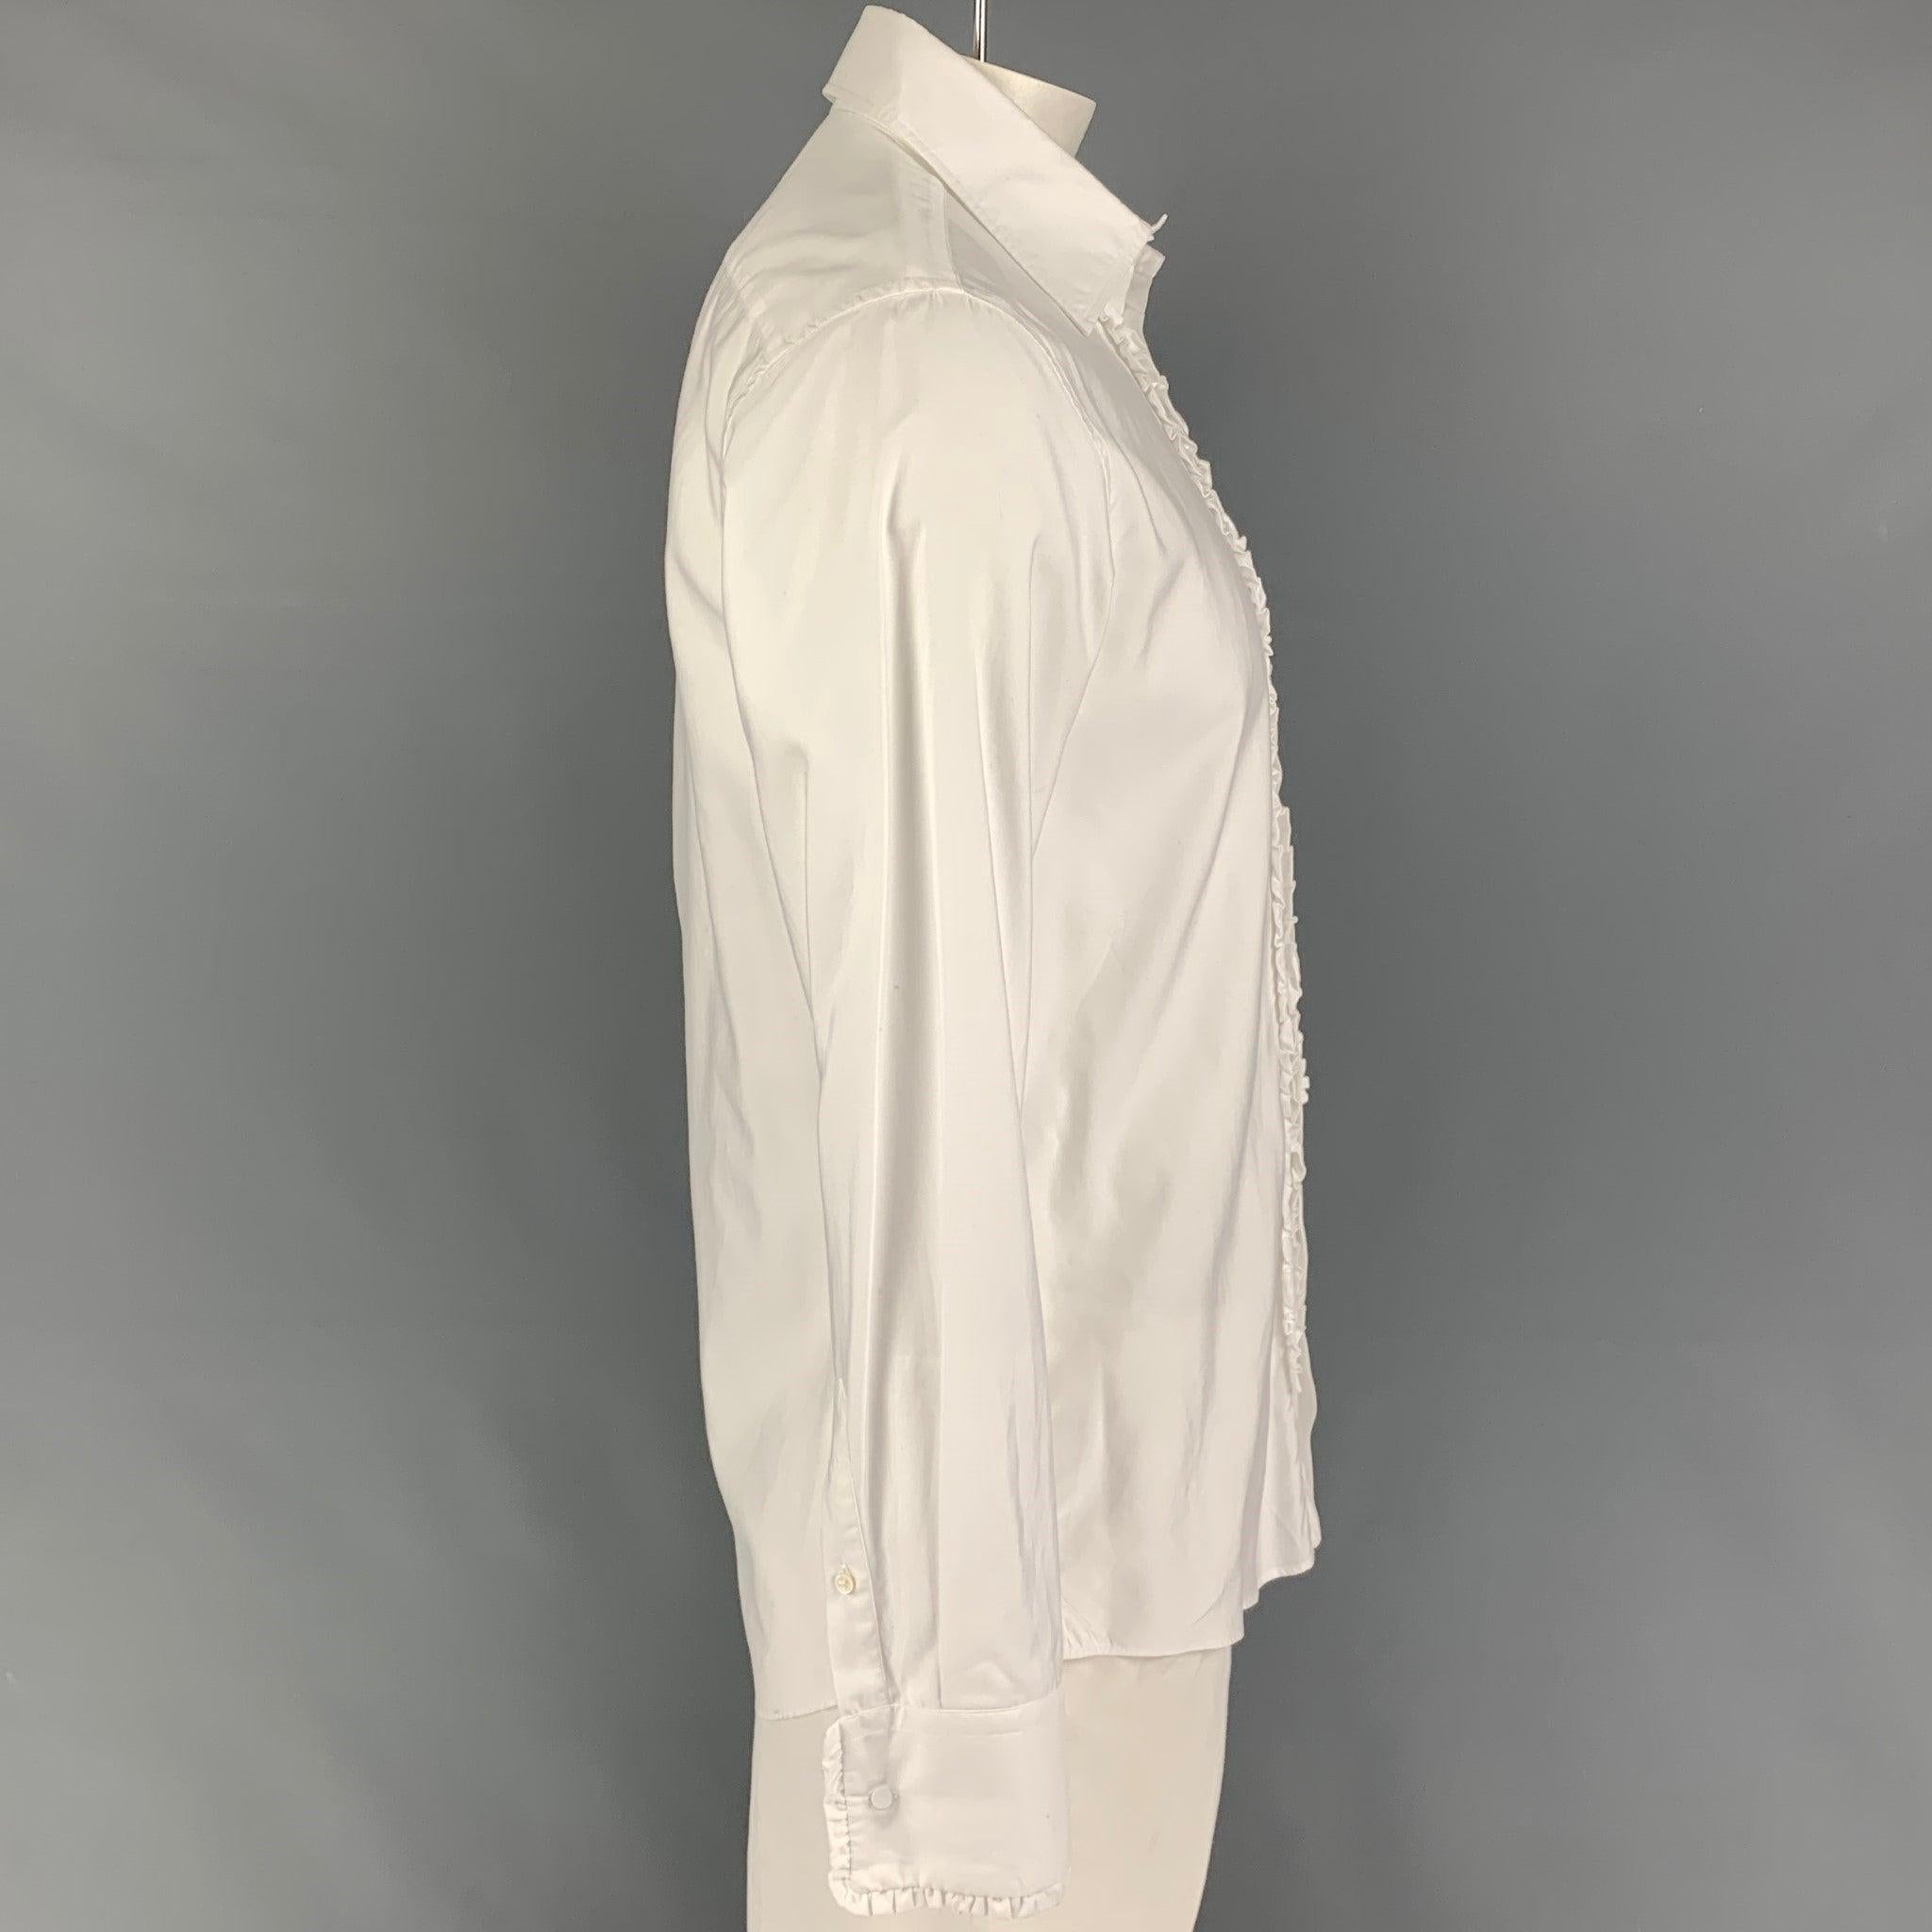 JIL SANDER long sleeve shirt comes in a white cotton featuring a ruffled trim, french cuffs, spread collar, and a button up closure. Cufflinks not included. Made in Italy.
Very Good
Pre-Owned Condition. 

Marked:   42 

Measurements: 
 
Shoulder: